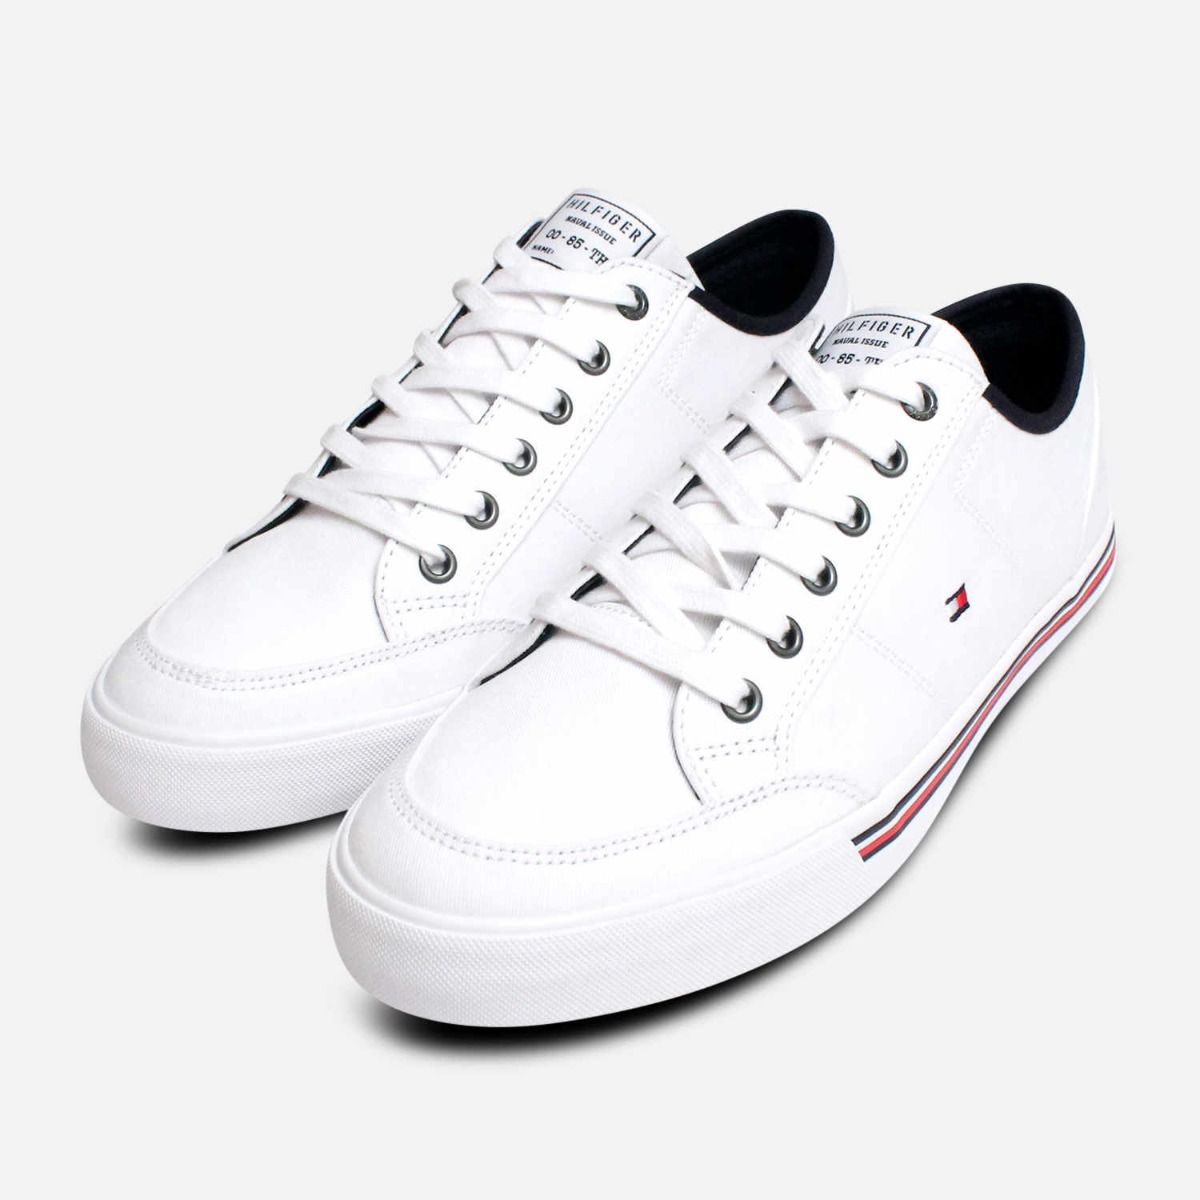 opladning Susteen længst Original Tommy Hilfiger White Canvas Cupsole Sneakers